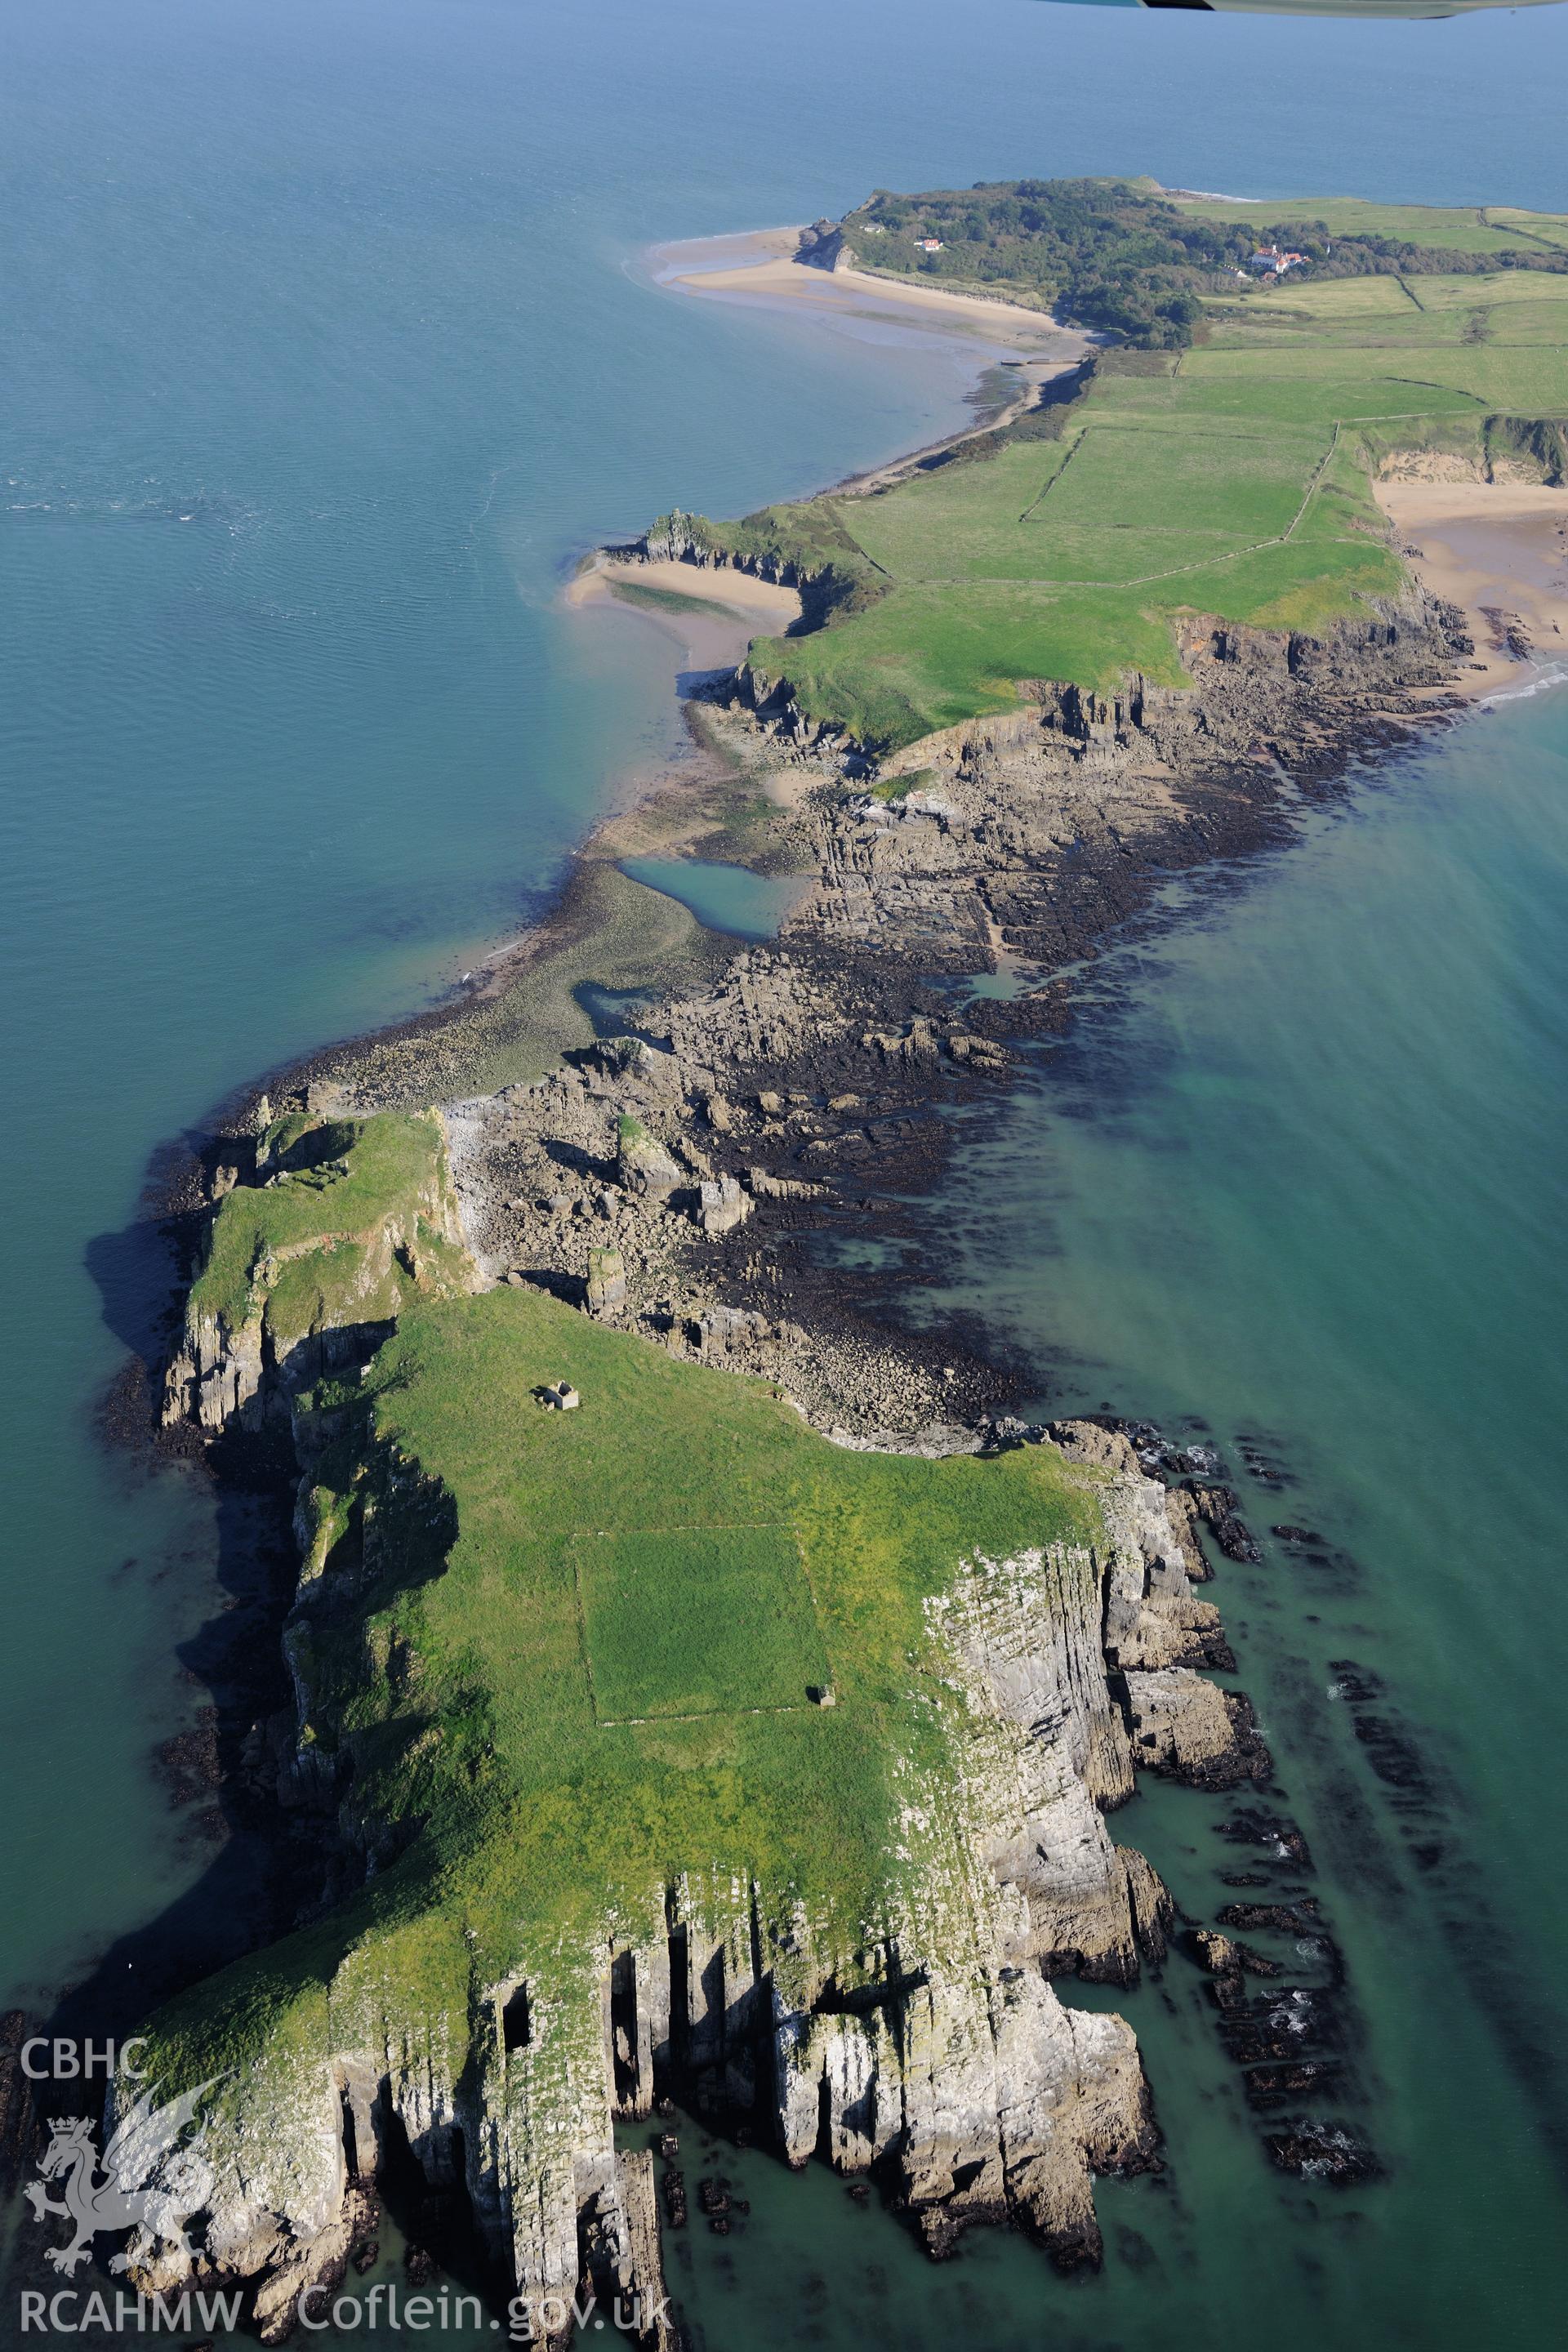 Monastic buildings, chapel ruins & field enclosure on St. Margaret's Island, with Caldey Island beyond & small sound in between. Oblique aerial photograph taken during RCAHMW's programme of archaeological aerial reconnaissance by Toby Driver, 30/09/2015.